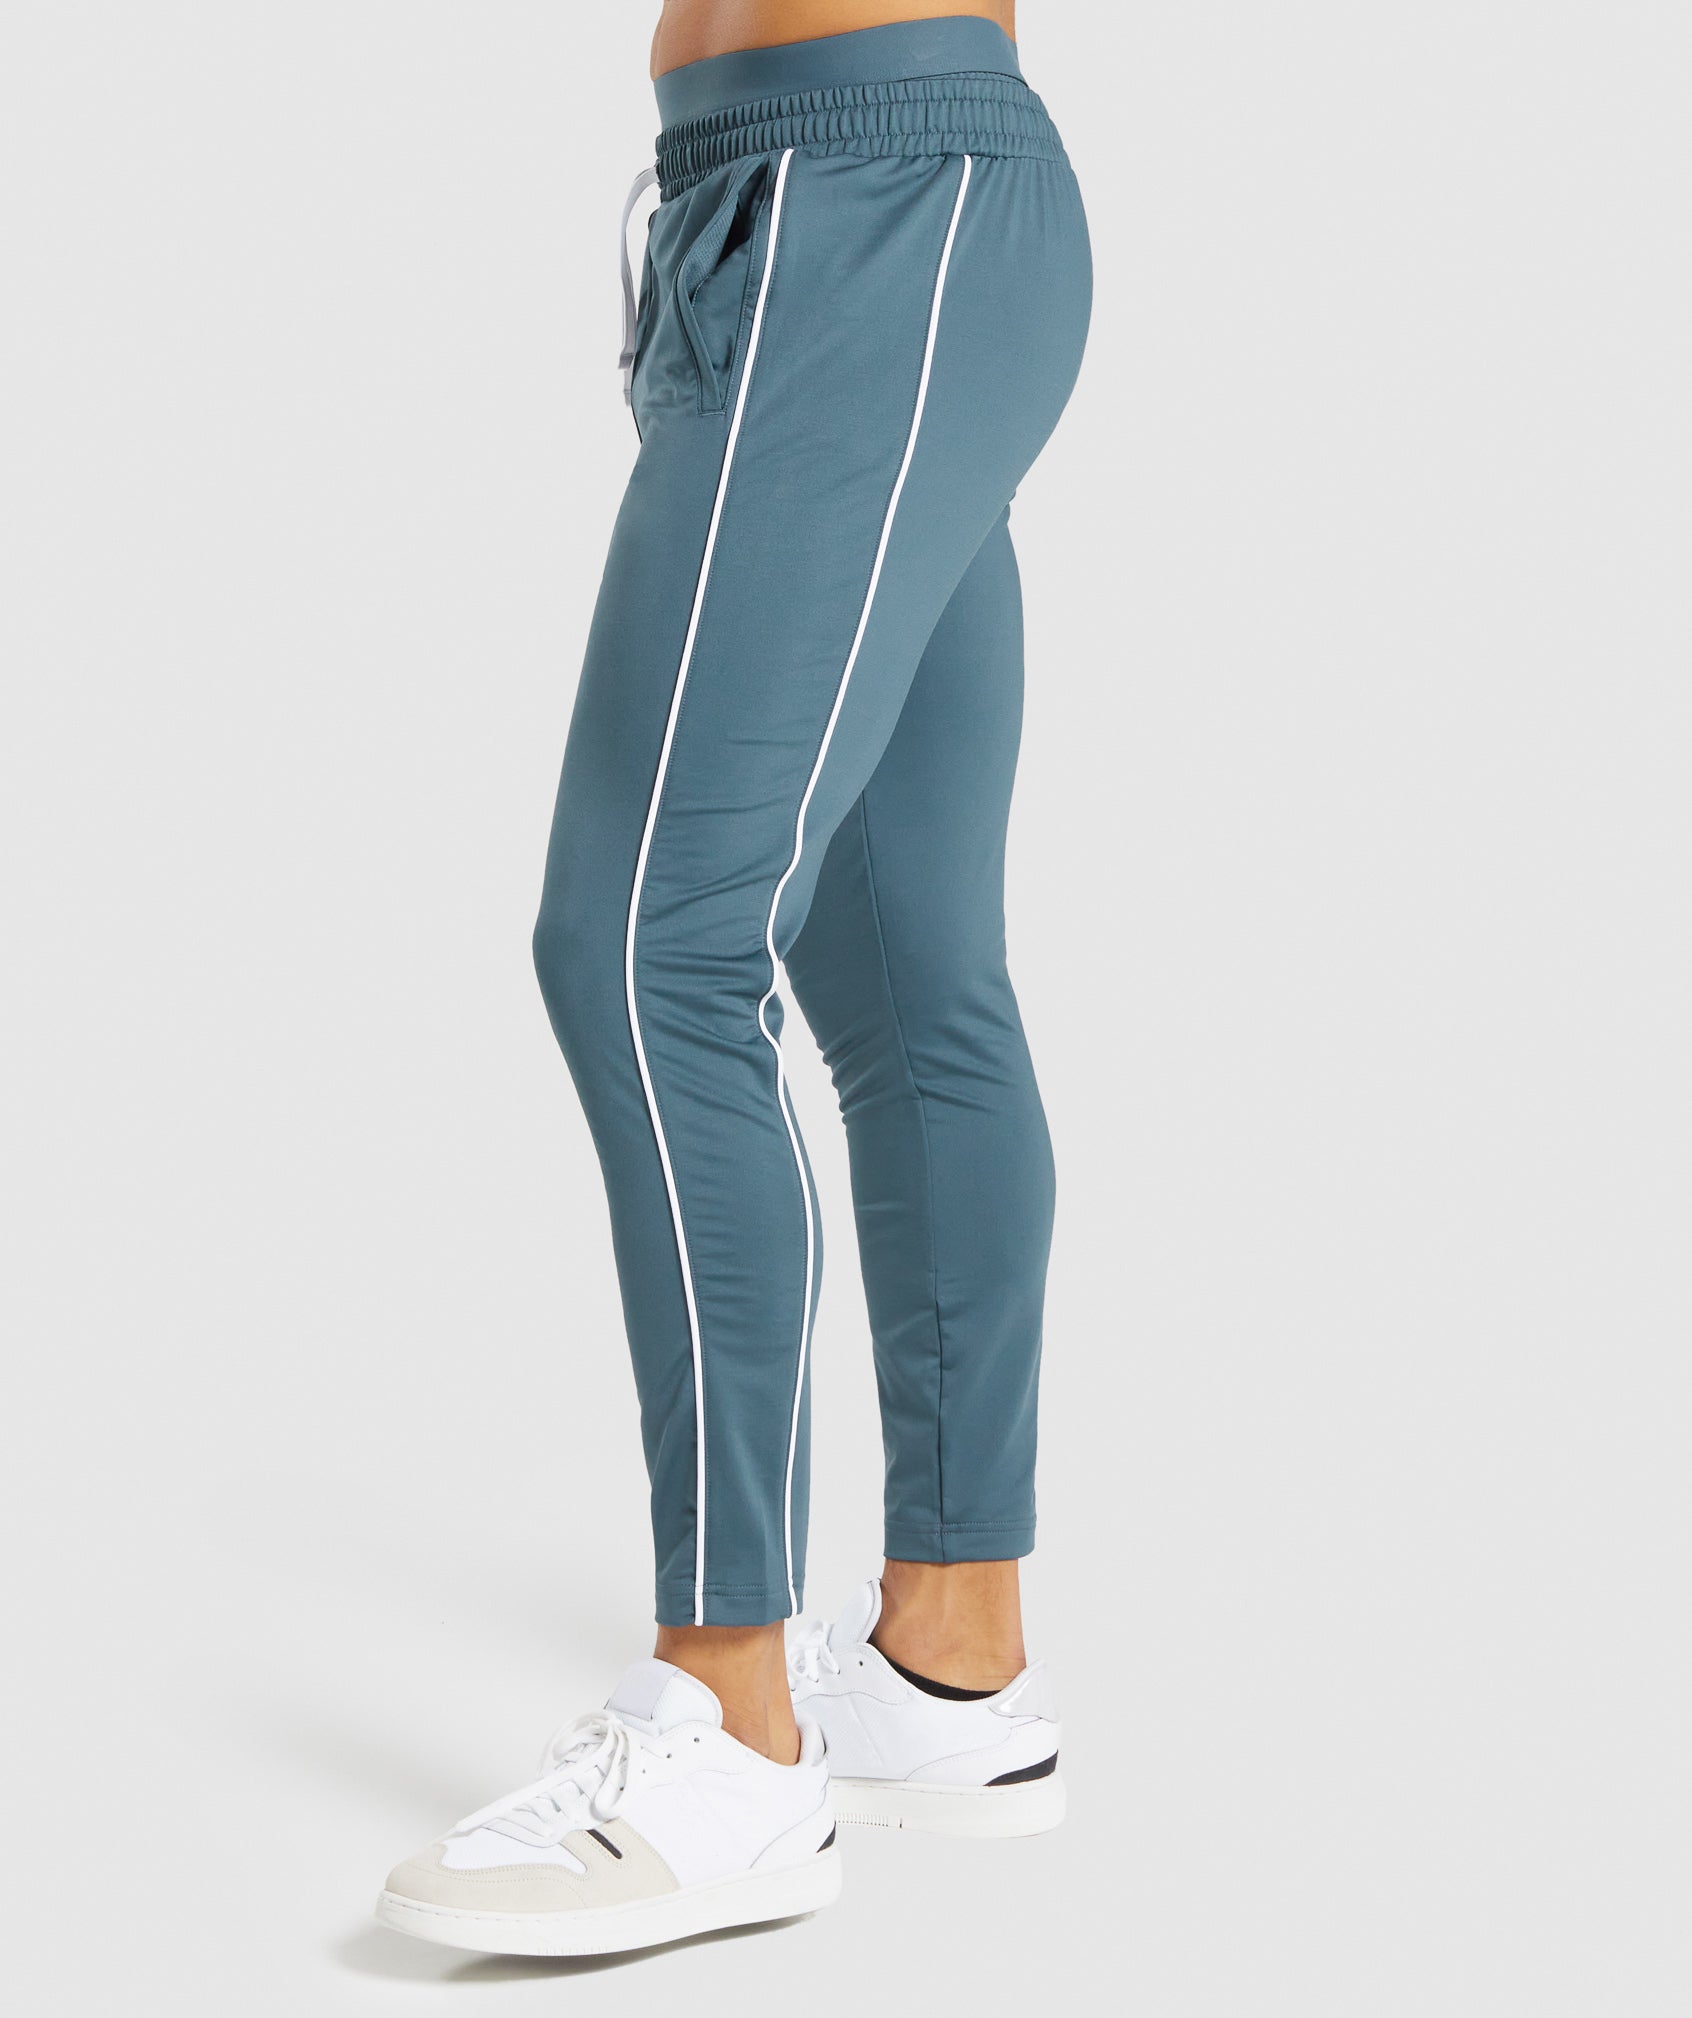 Recess Joggers in Teal - view 4